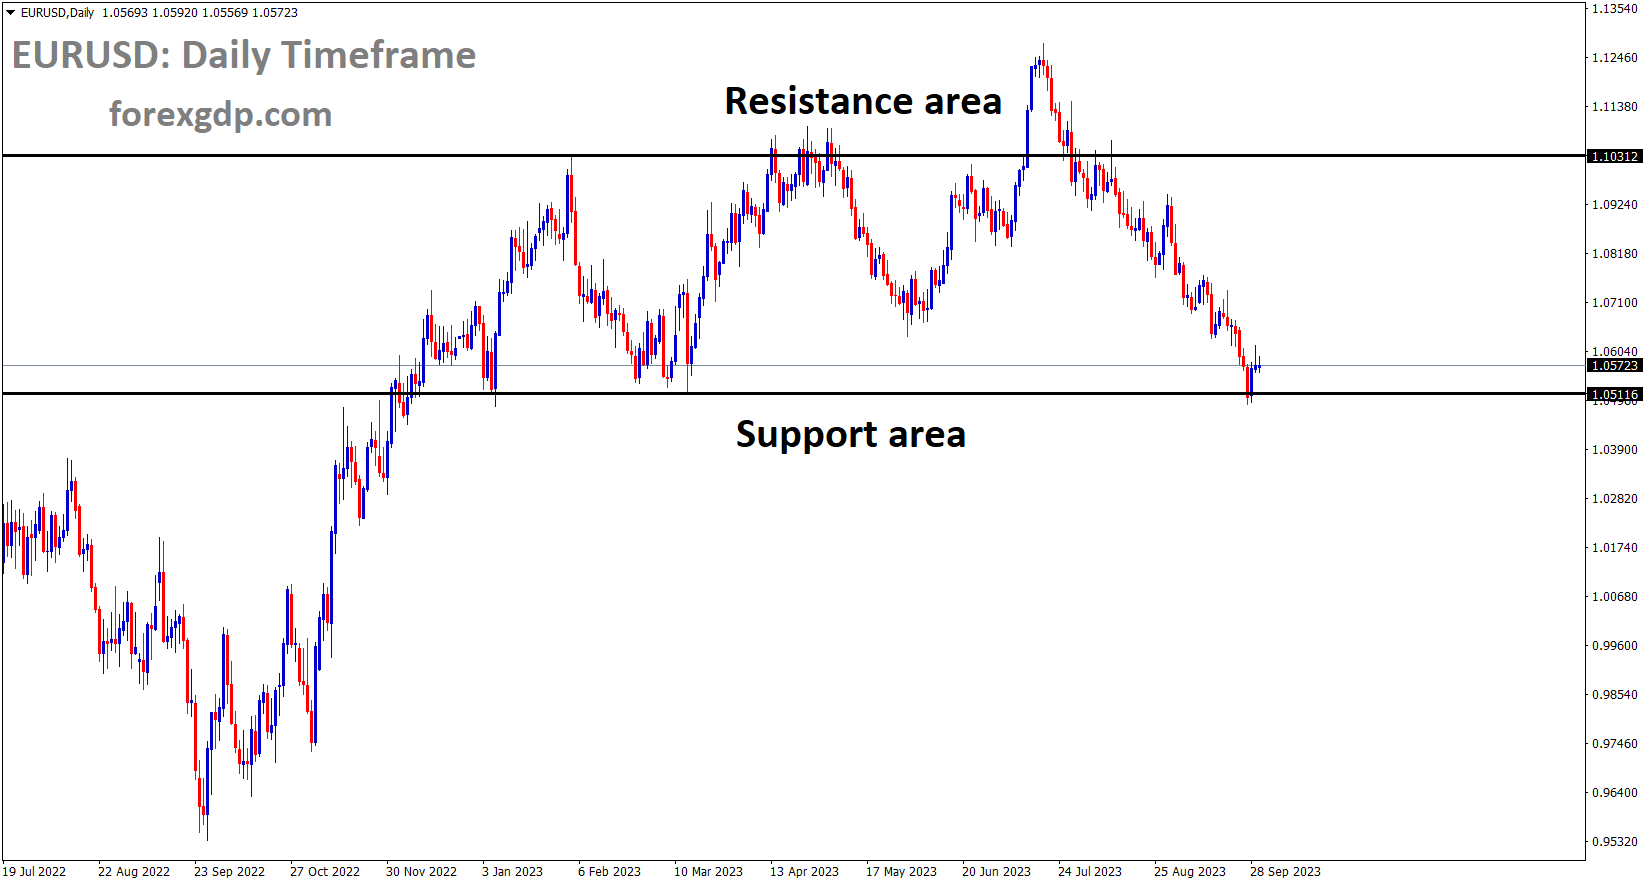 EURUSD is moving in the Box pattern and the market has rebounded from the support area of the pattern